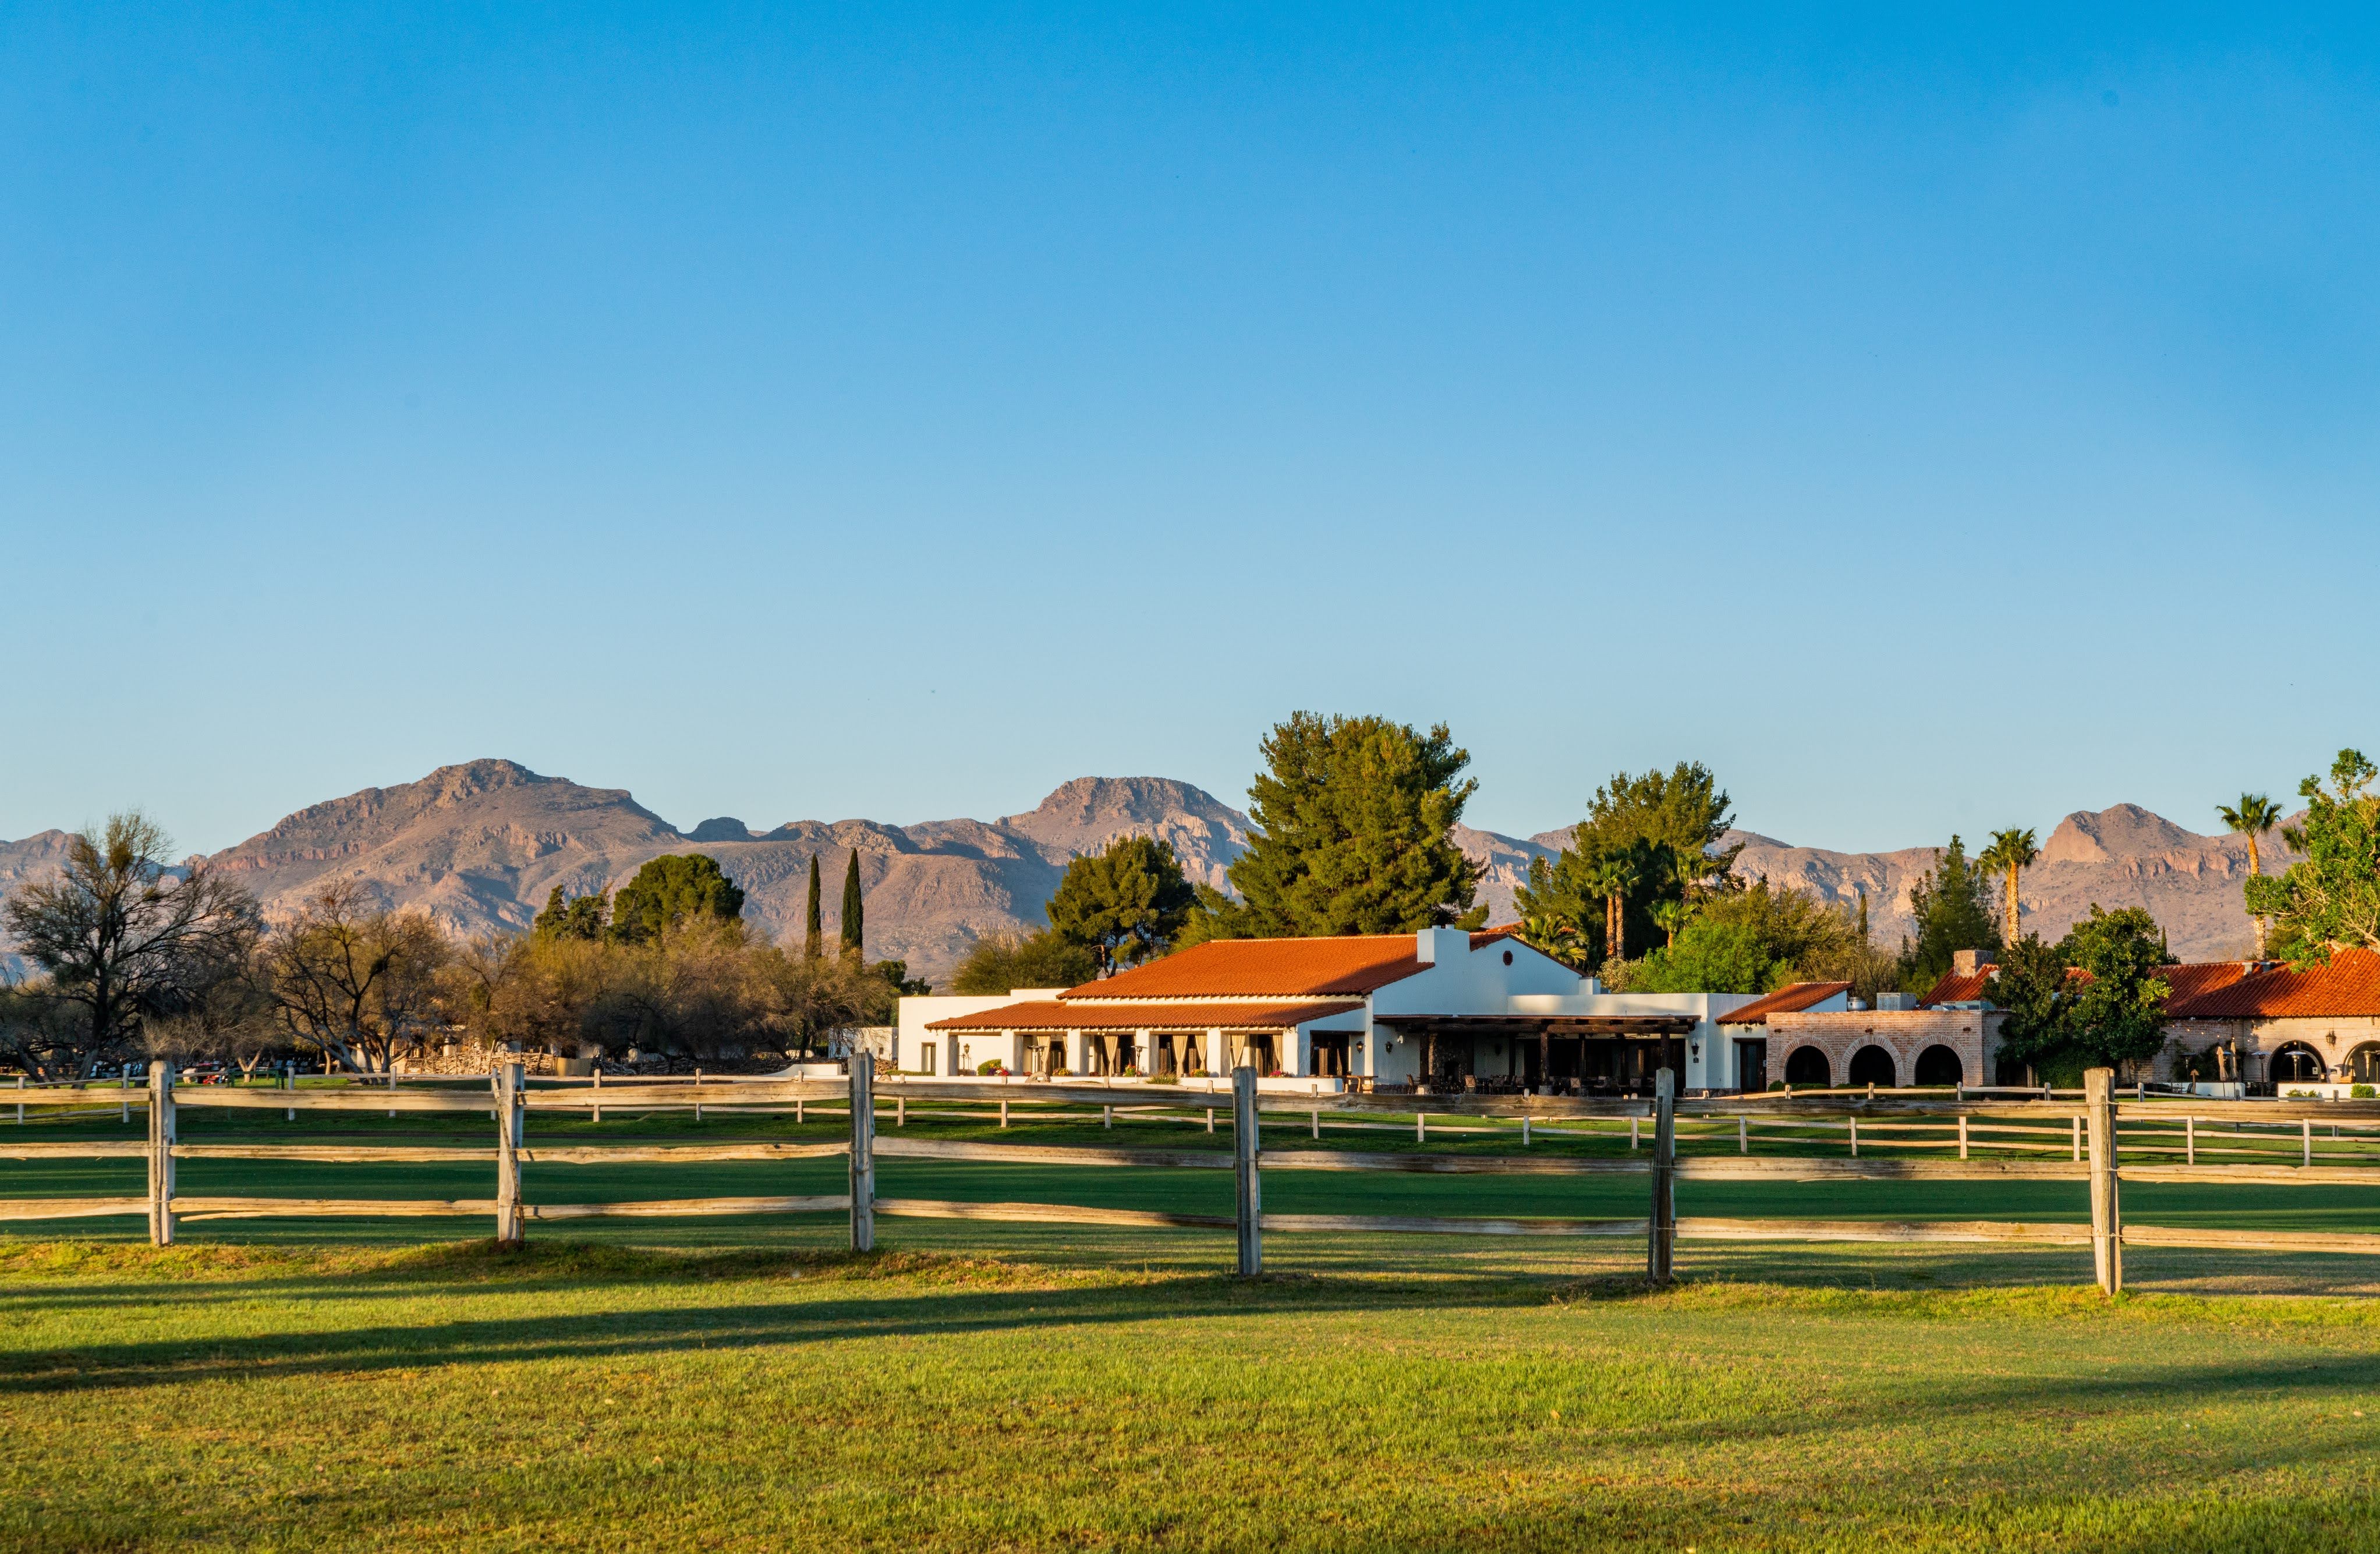 Stables and Venue from afar